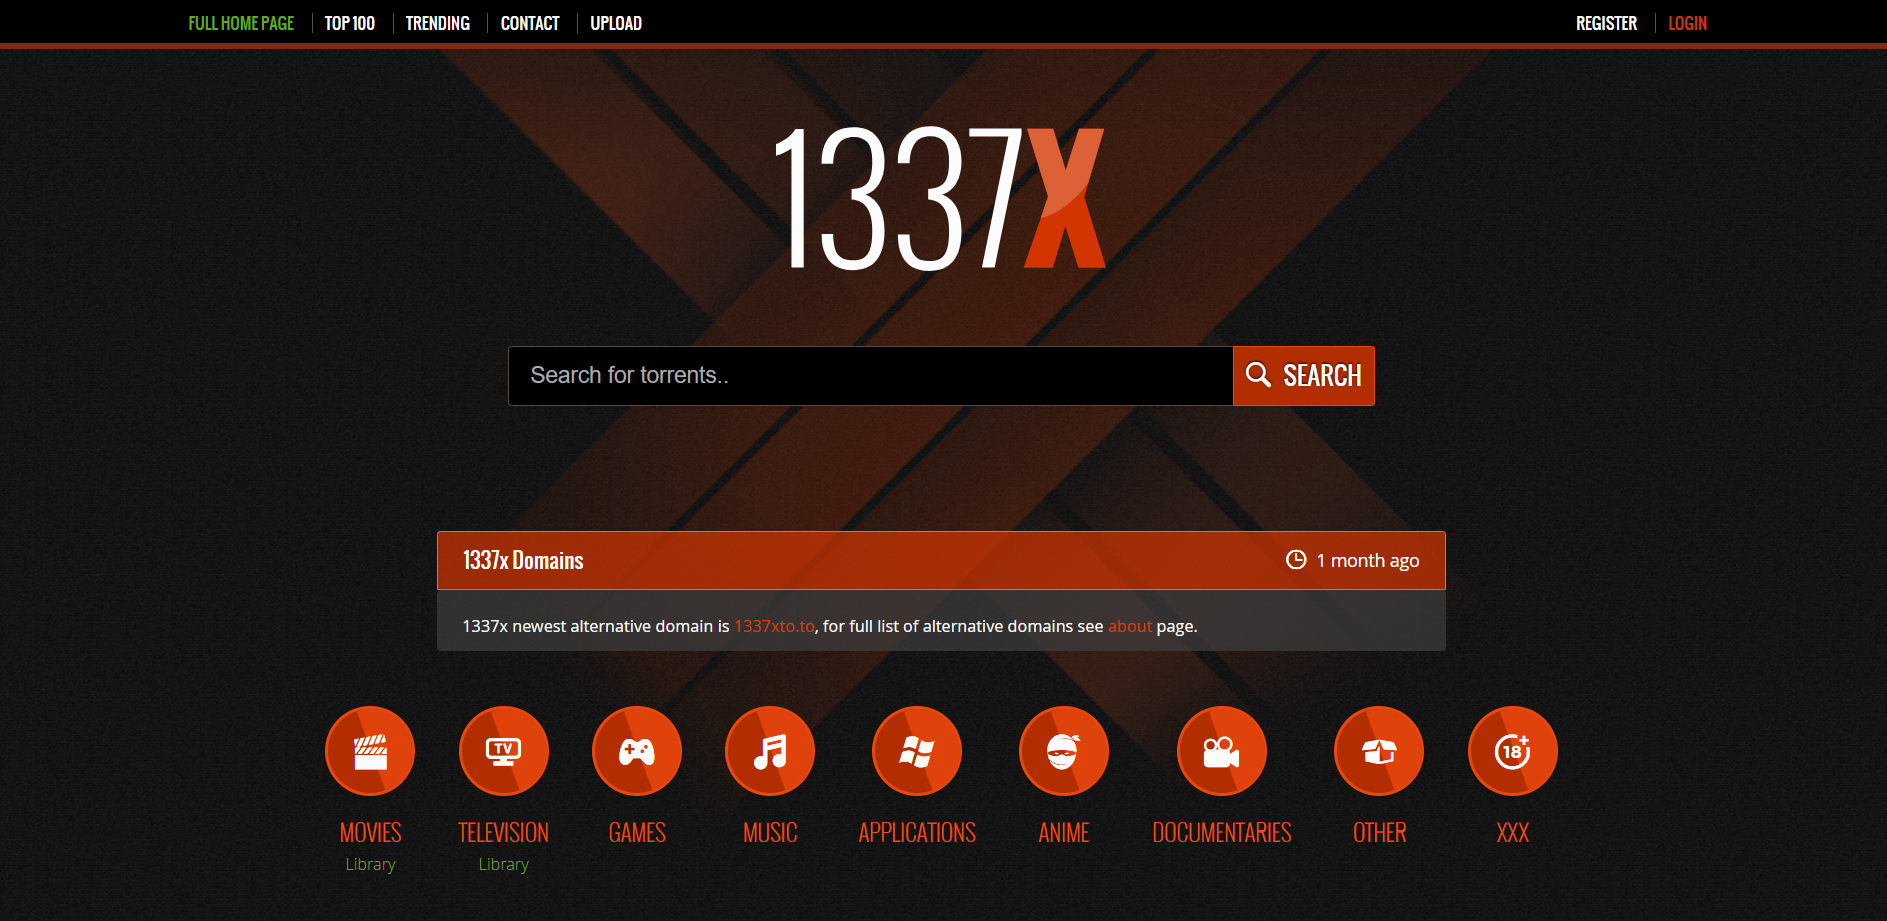 1337X is the best Mac torrent with millions of users